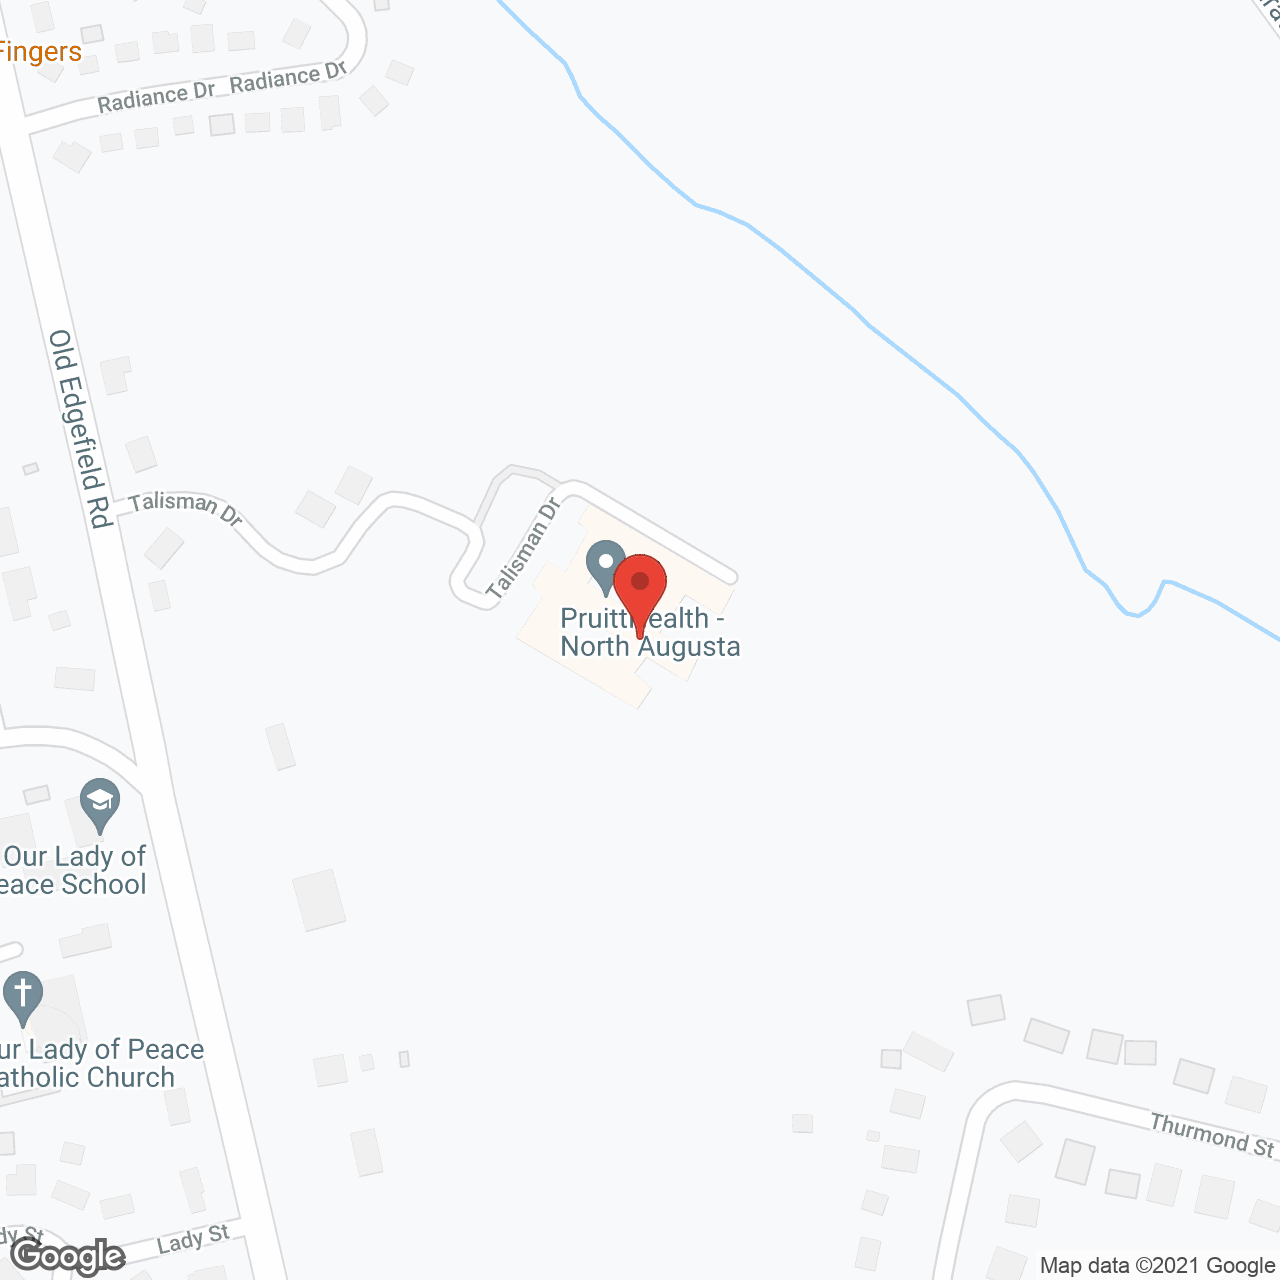 Crothall Healthcare in google map